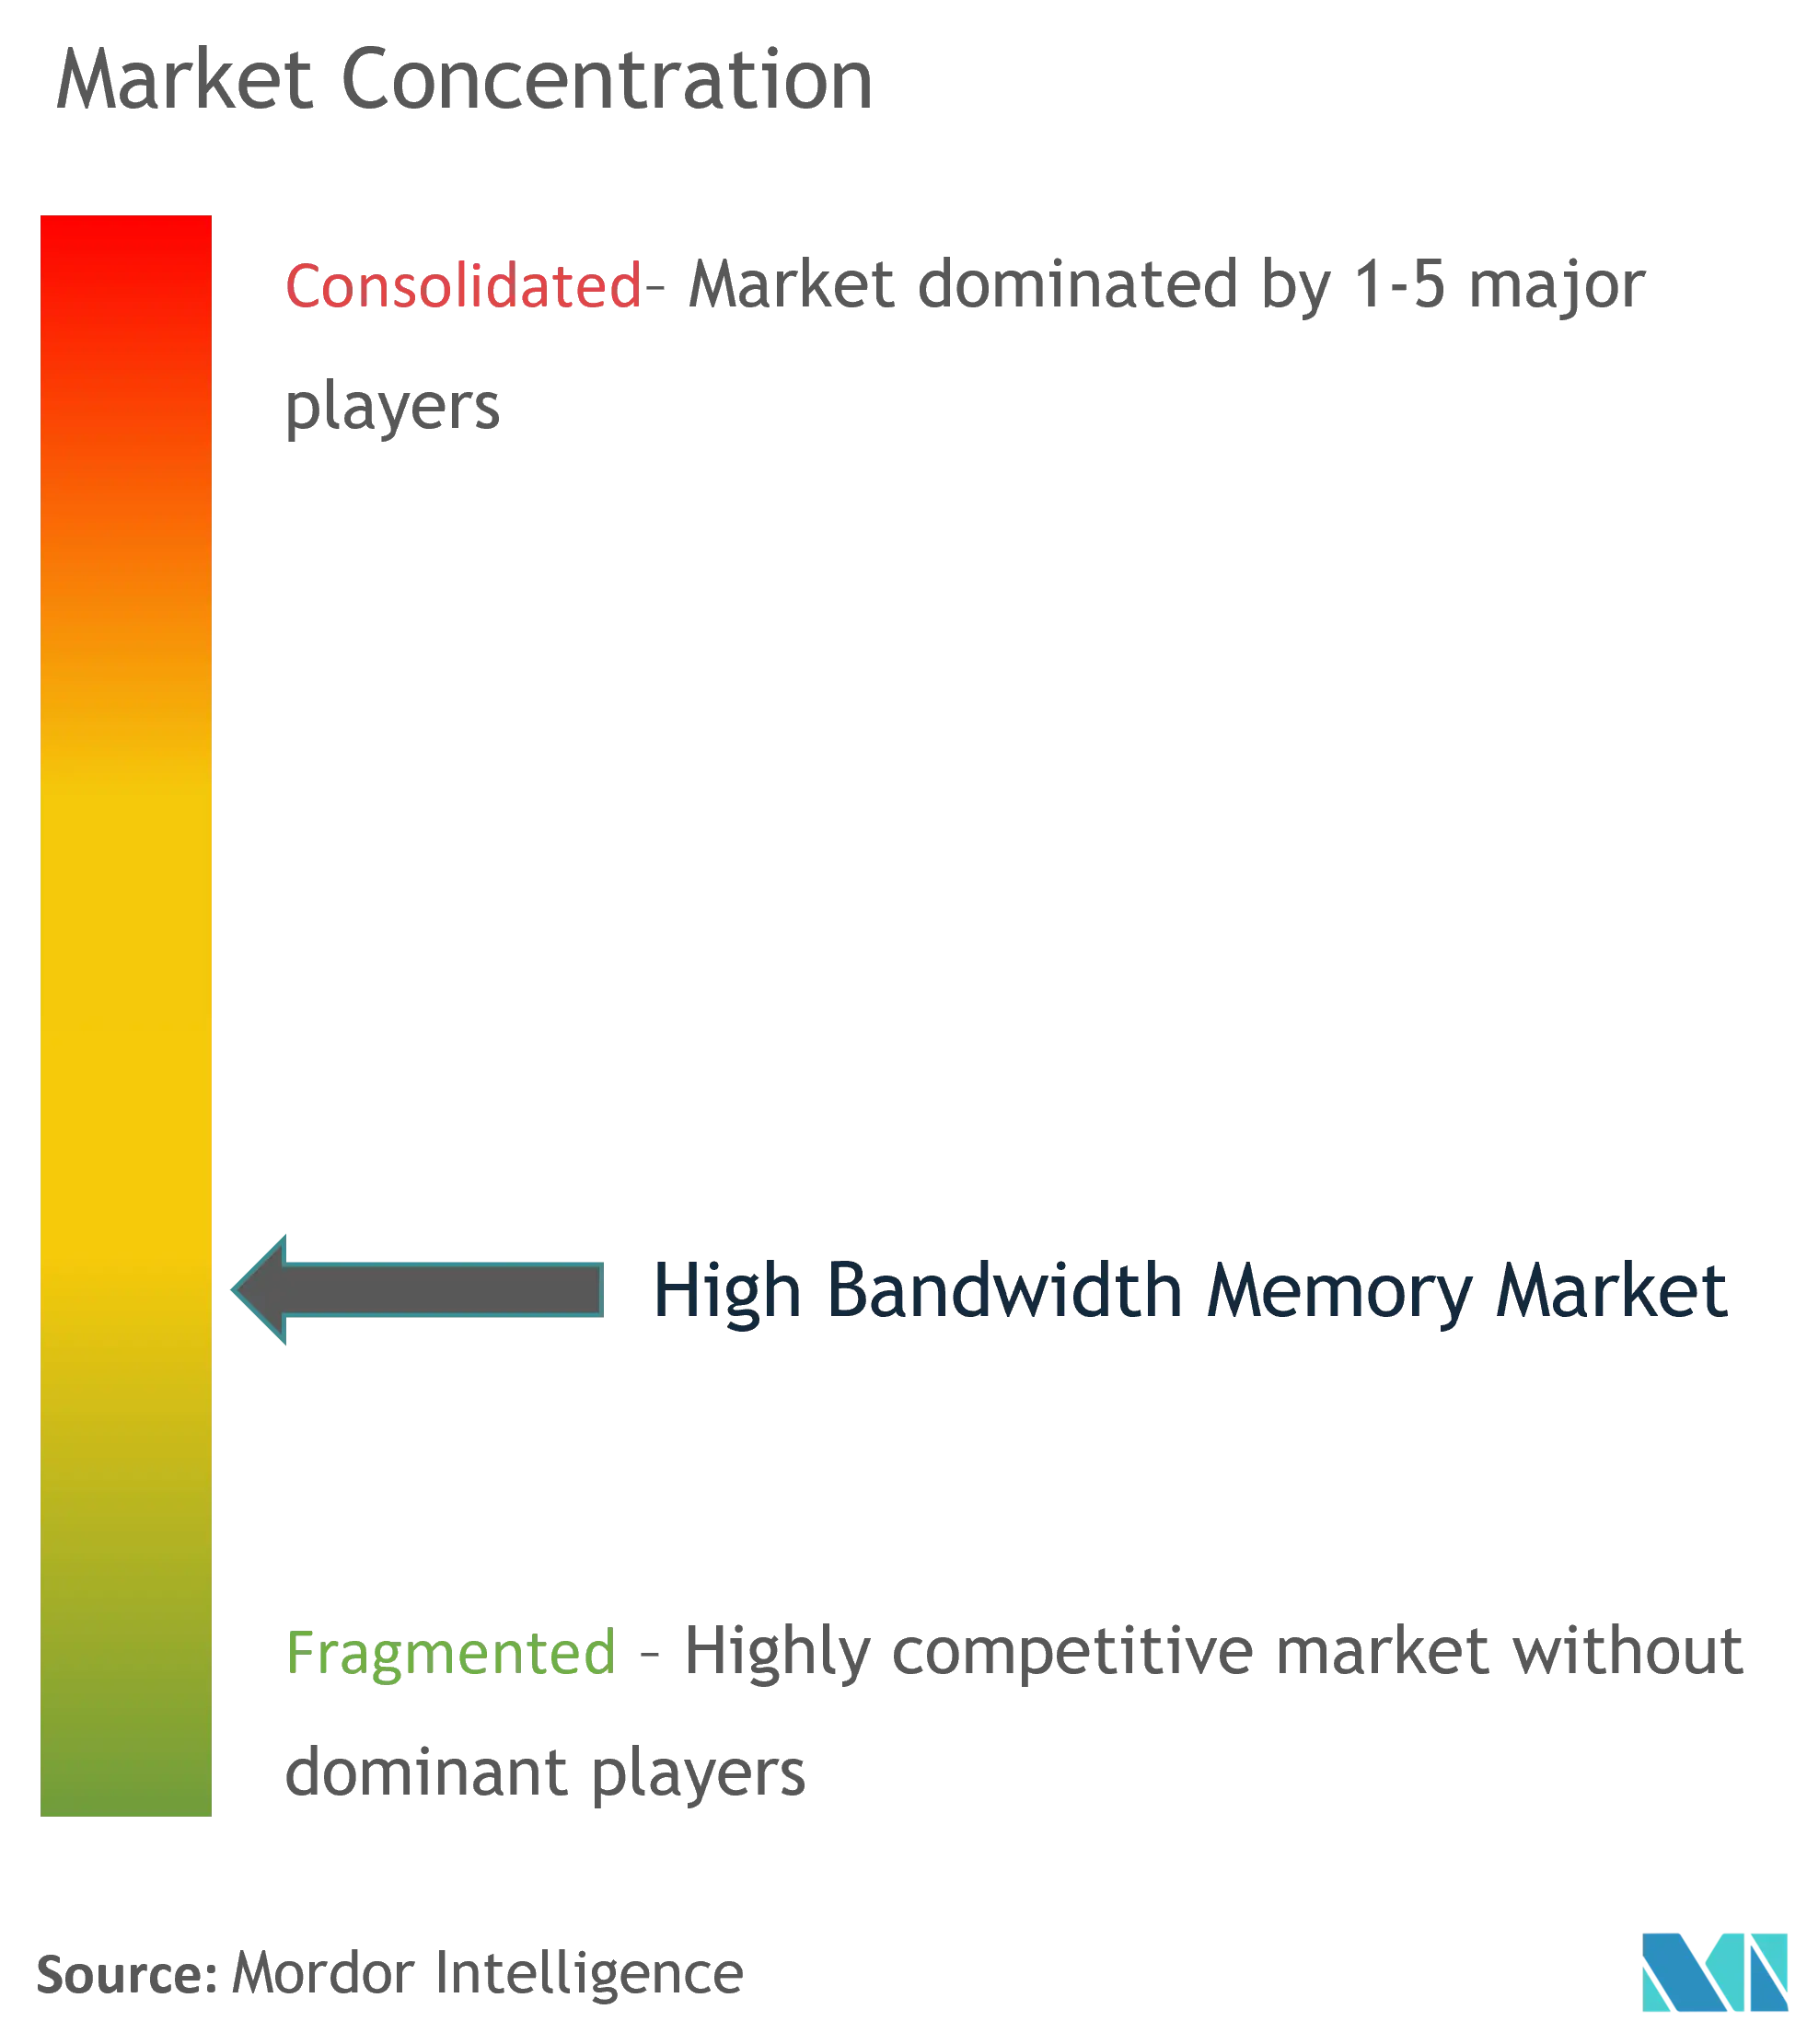 High Bandwidth Memory Market Concentration